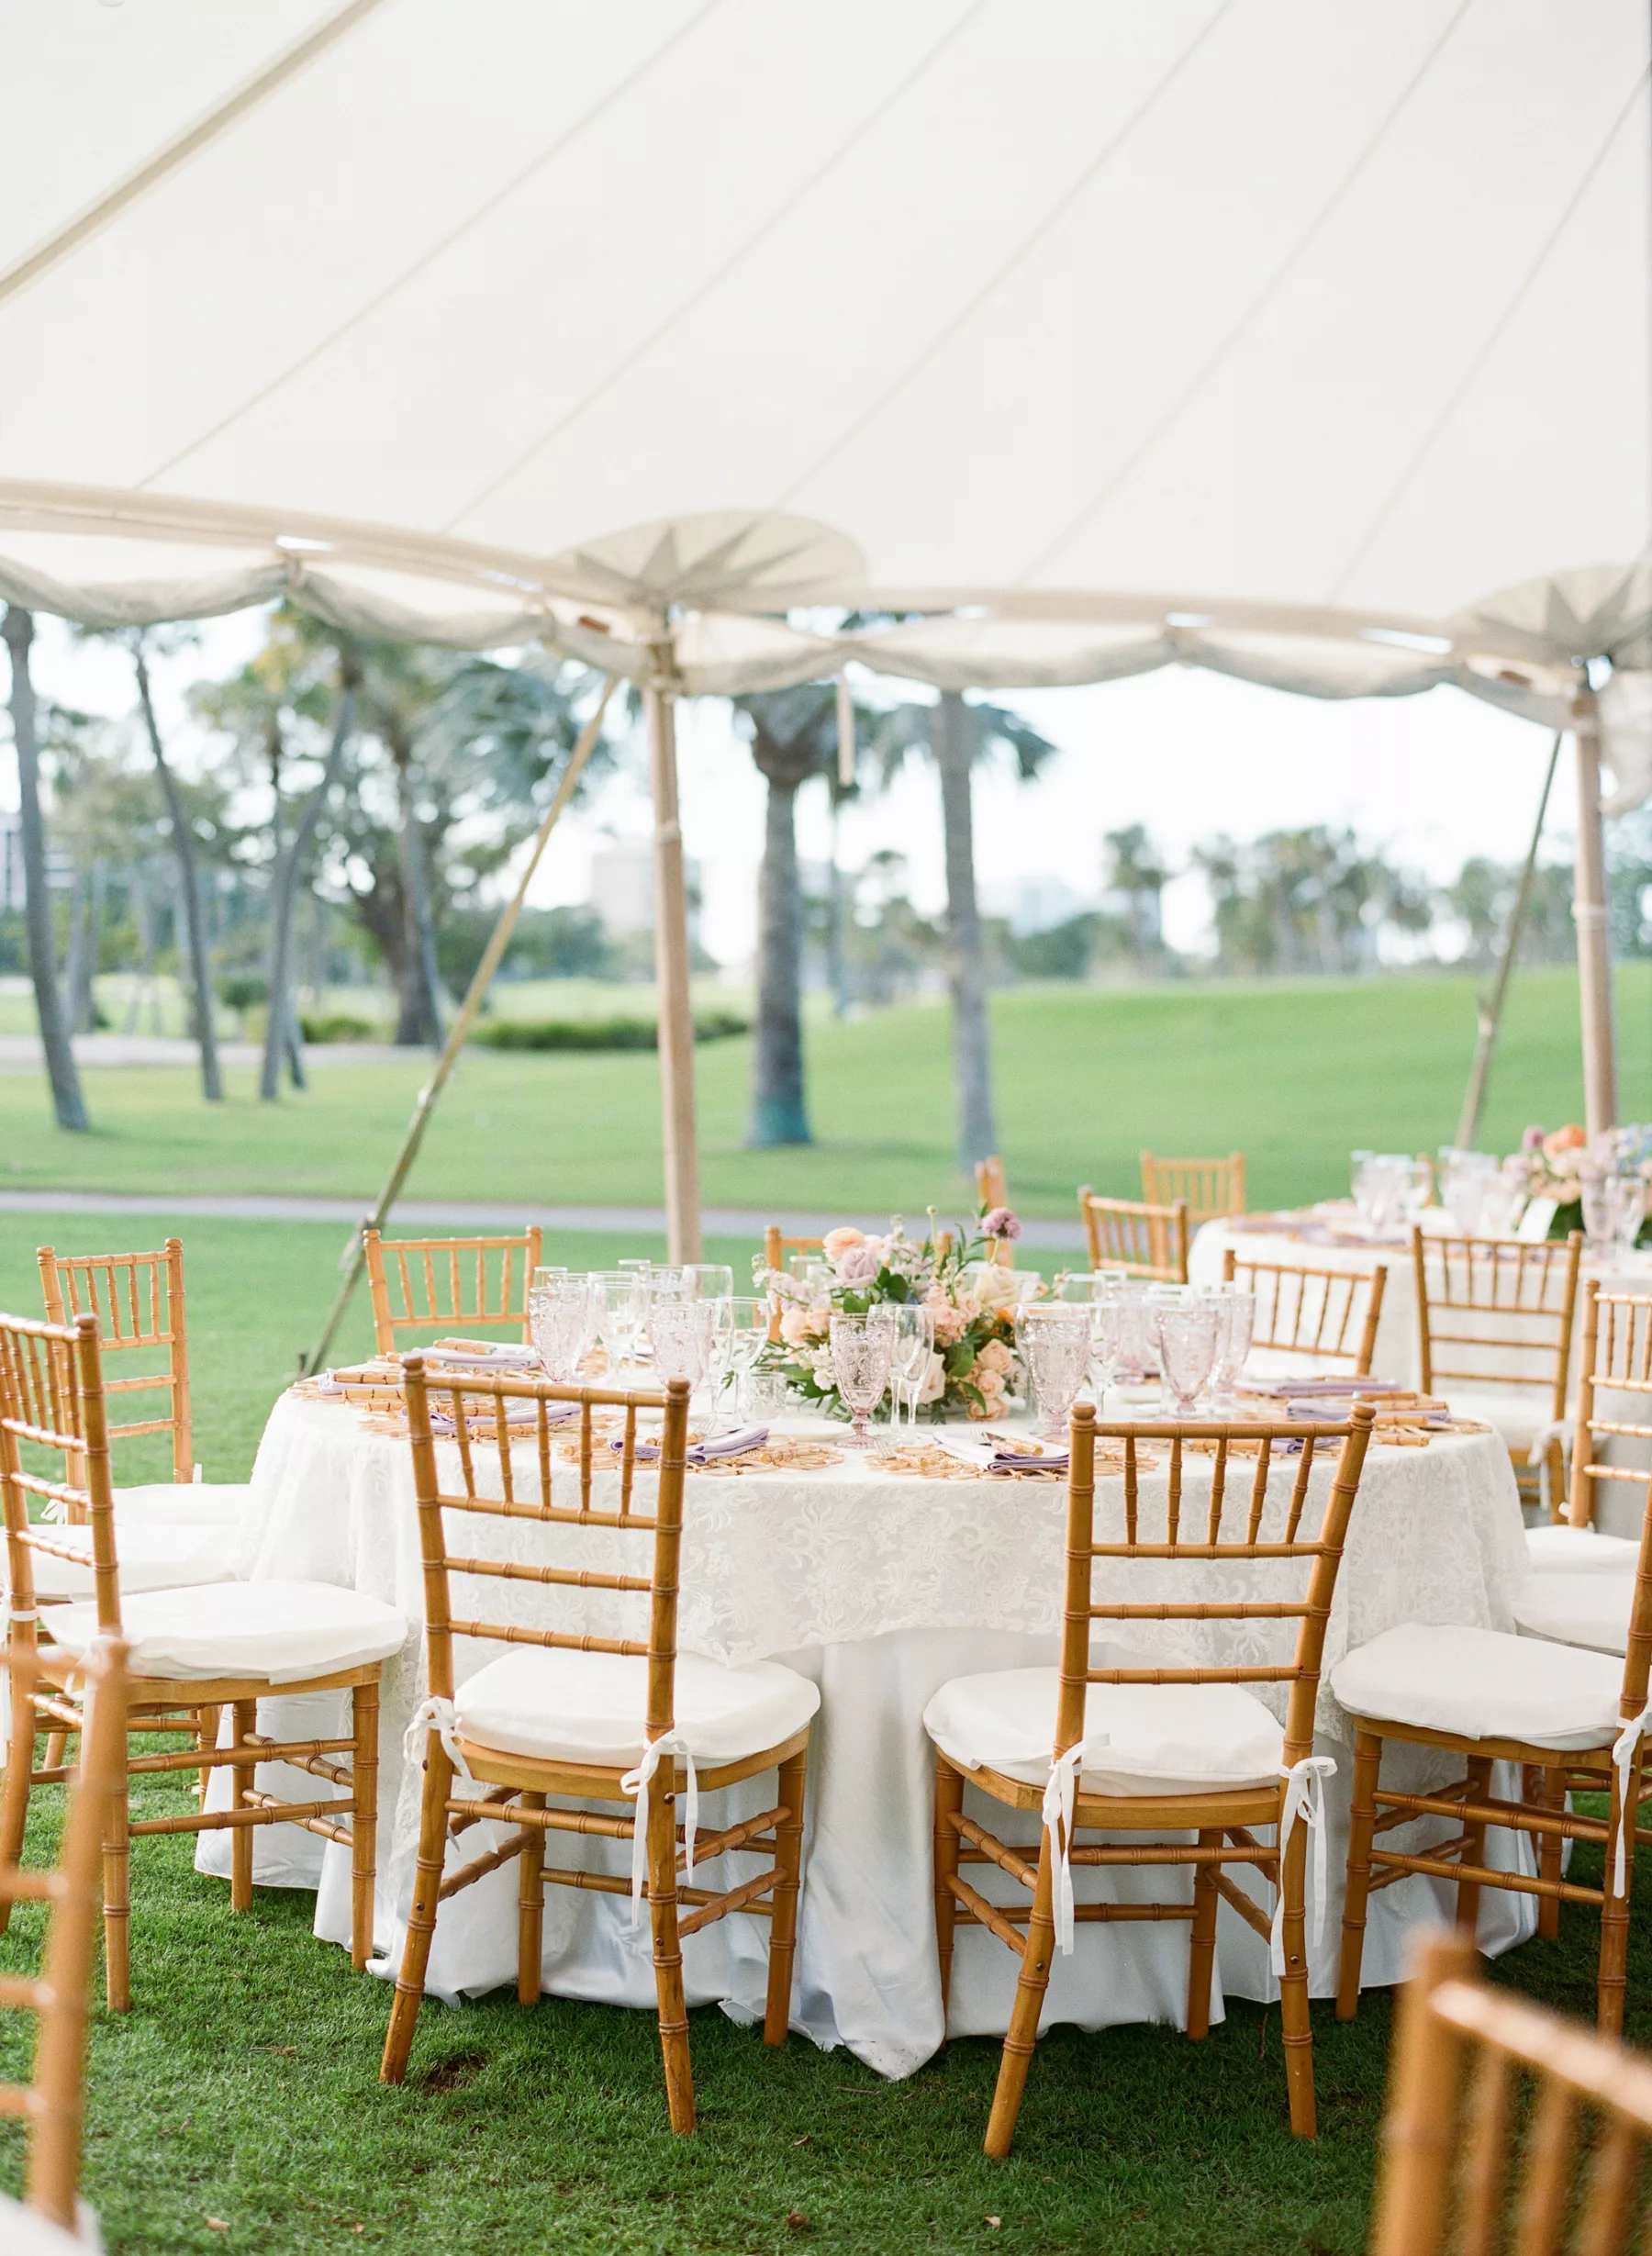 Luxurious Pastel and Gold Tented Wedding Reception Inspiration | Tampa Bay Event Venue The Resort At Longboat Key Club